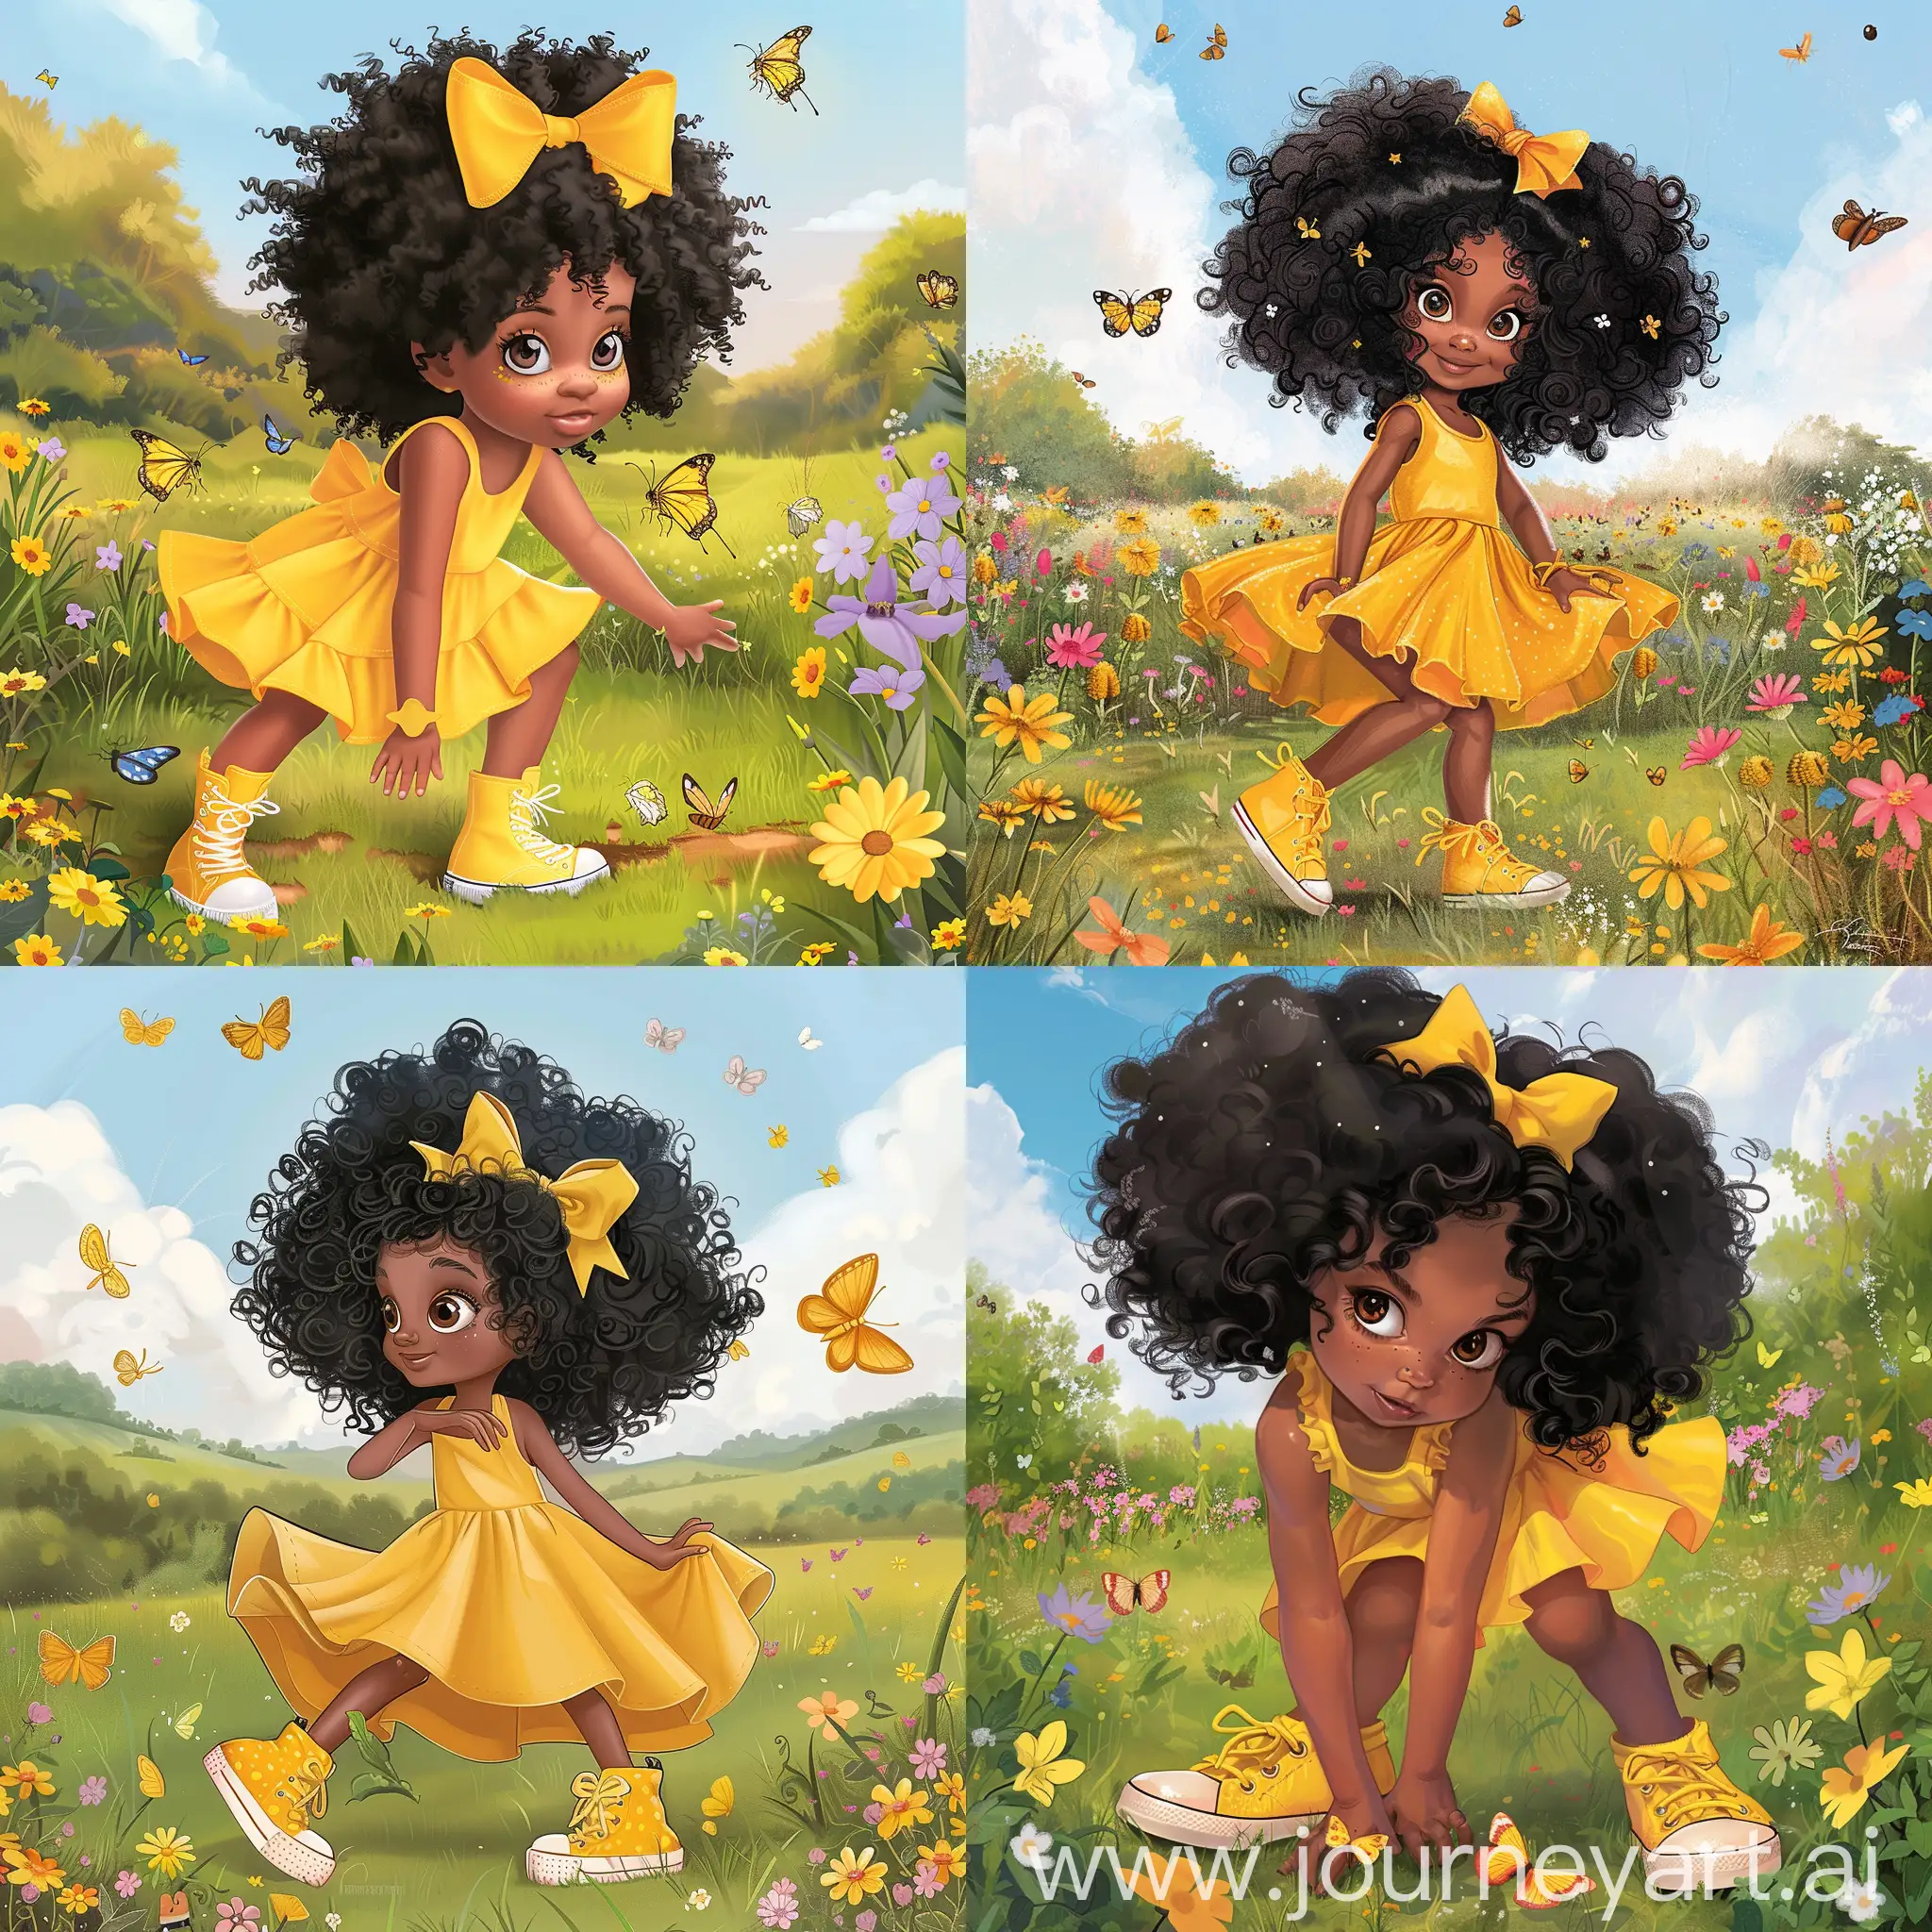  standing full body, 7 year old black girl with big beautiful black curly afro hair,sleeveless sunnyYellow dress,Yellow high top shoes,Yellow Hair bow and Brown Eyes, playing in of field of butterfiles and flowers children's book illustration